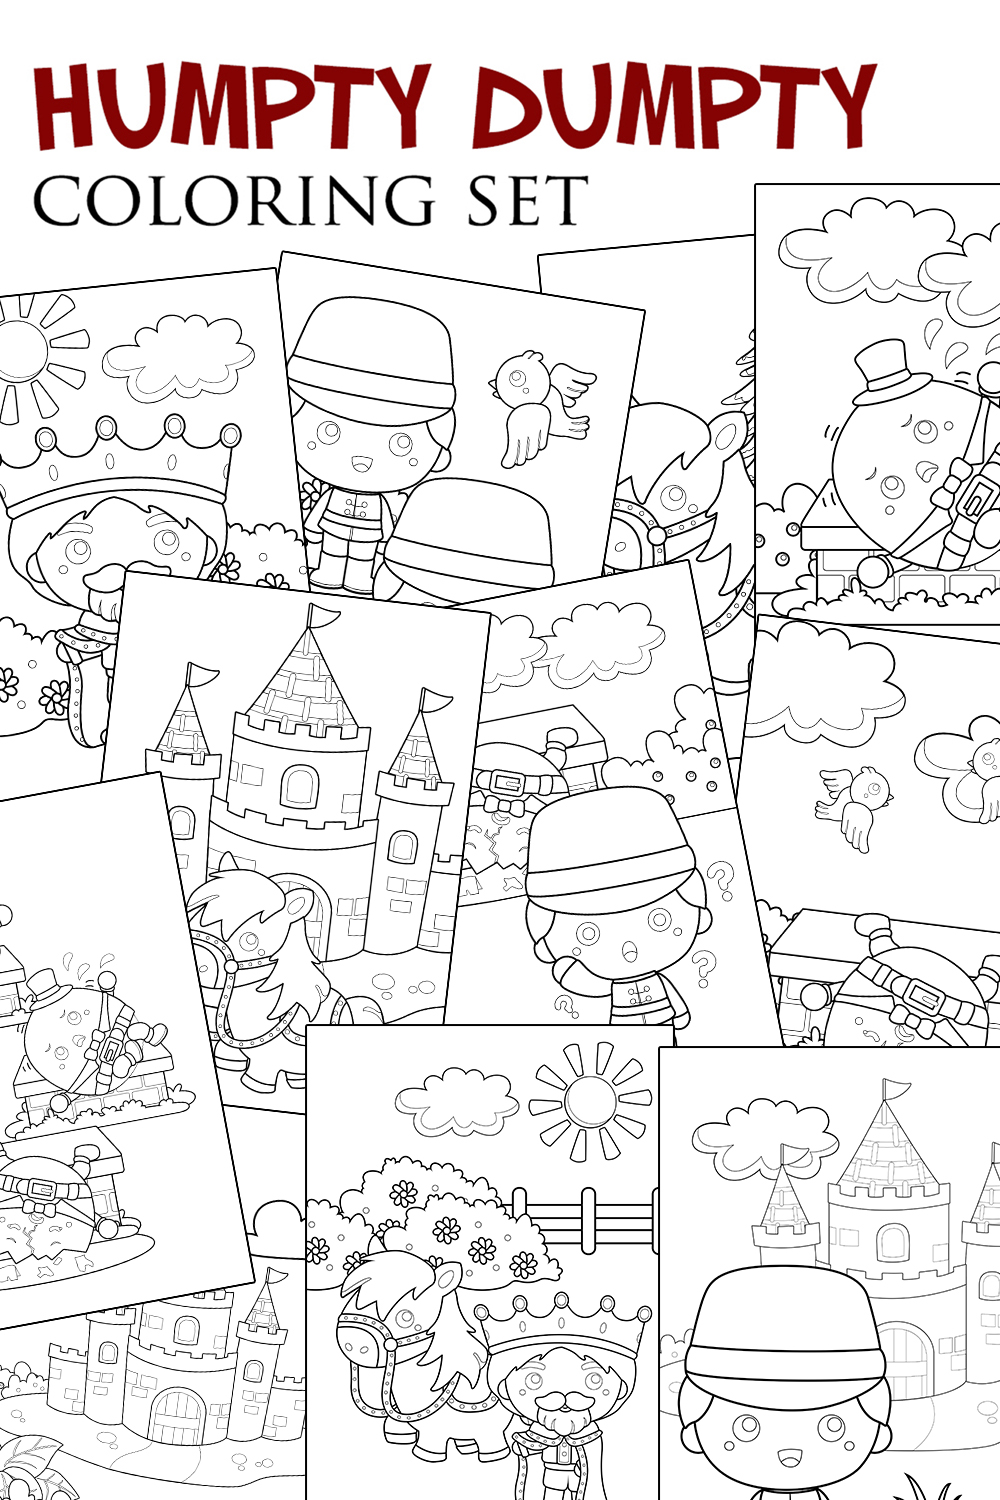 Humpty Dumpty Classic Song Rhymes Story Coloring Pages Activity For Kids And Adult pinterest preview image.